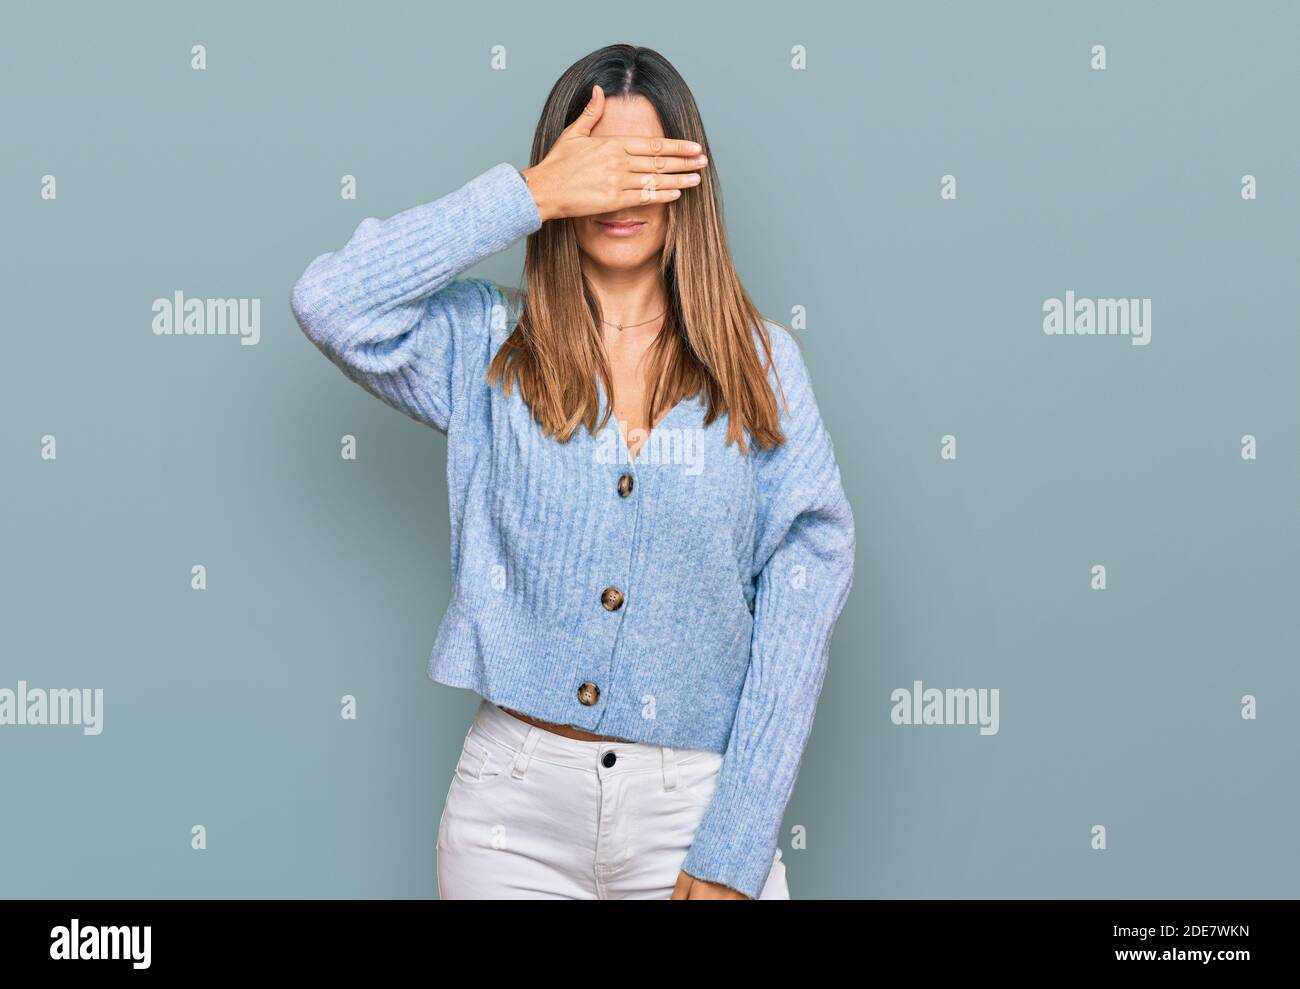 Young woman wearing casual clothes covering eyes with hand, looking serious and sad. sightless, hiding and rejection concept Stock Photo